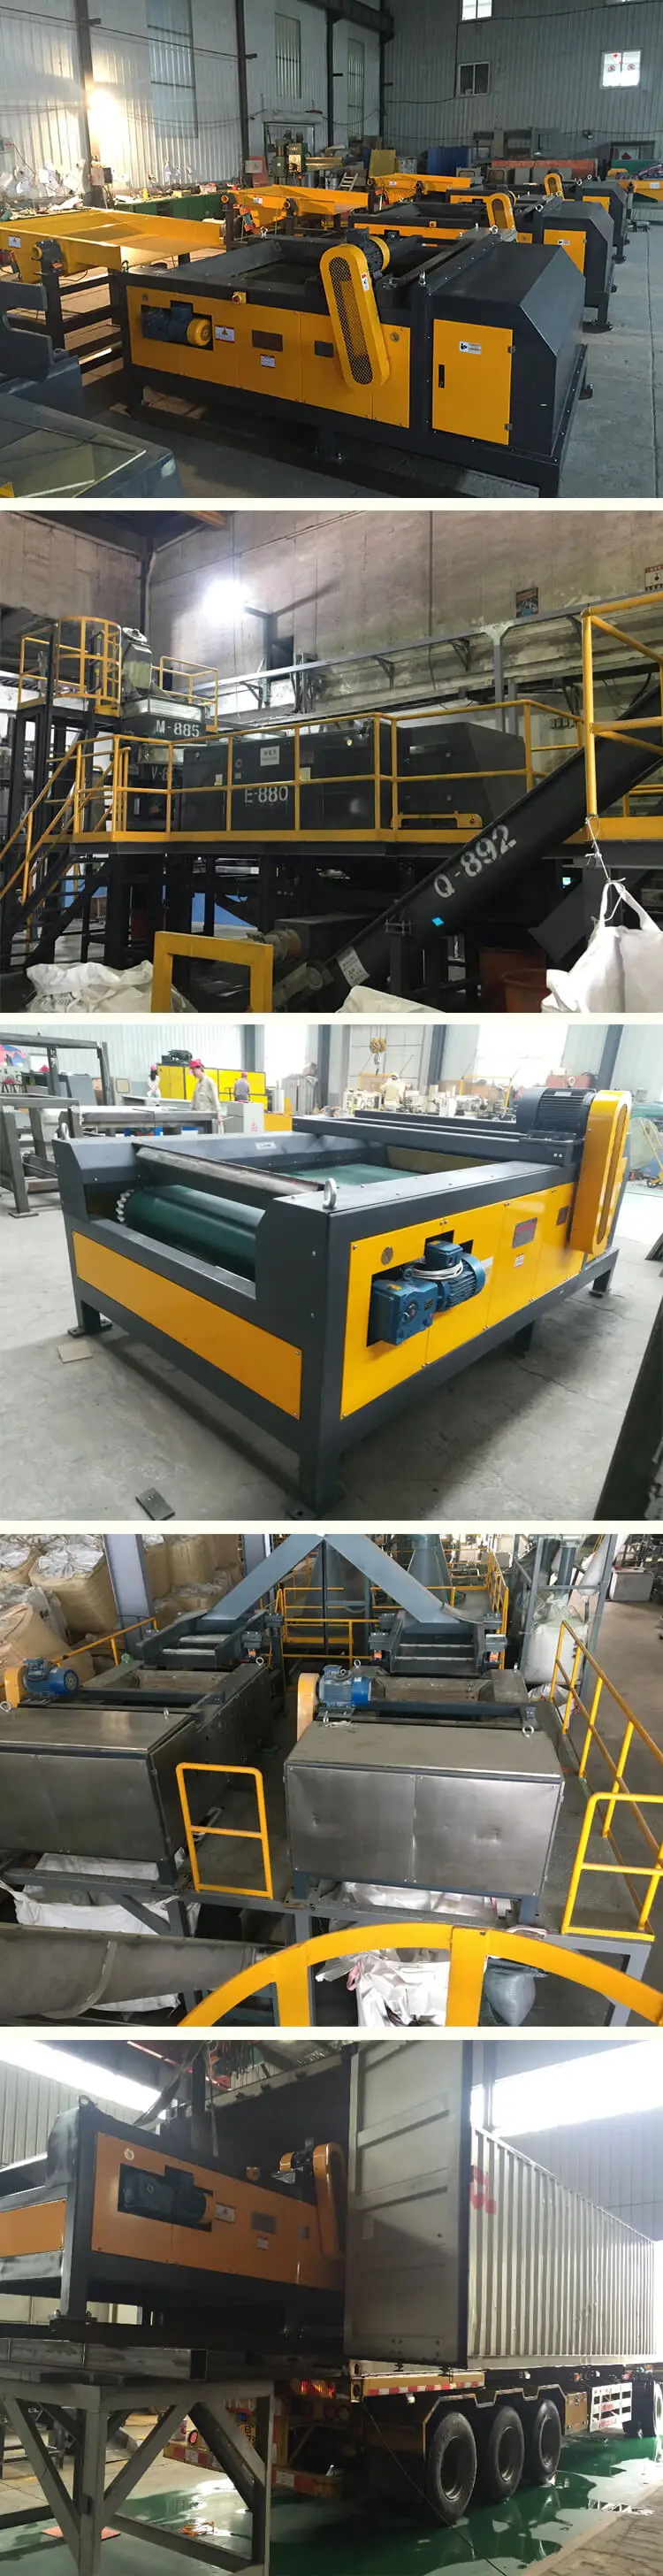 Recycling Machine Eddy Current Separator with high magnet intensity for glasses scraps containing aluminum, steel and copper